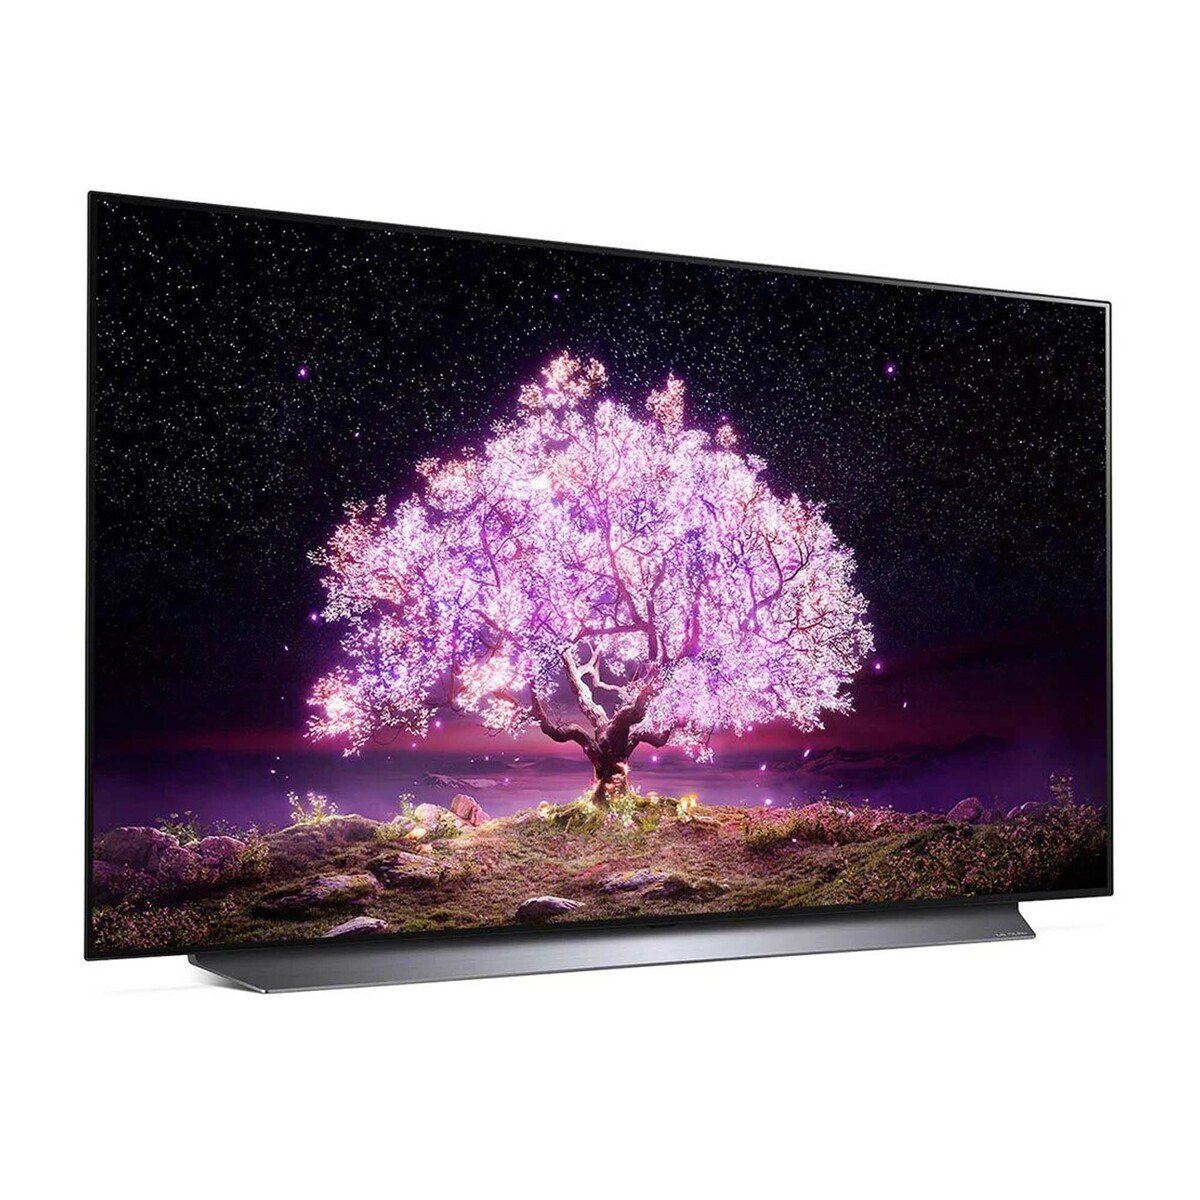 LG OLED TV 83 Inch C1 Series Cinema Screen Design, New 2021, 4K Cinema HDR webOS Smart with ThinQ AI Pixel Dimming OLED83C1PVA